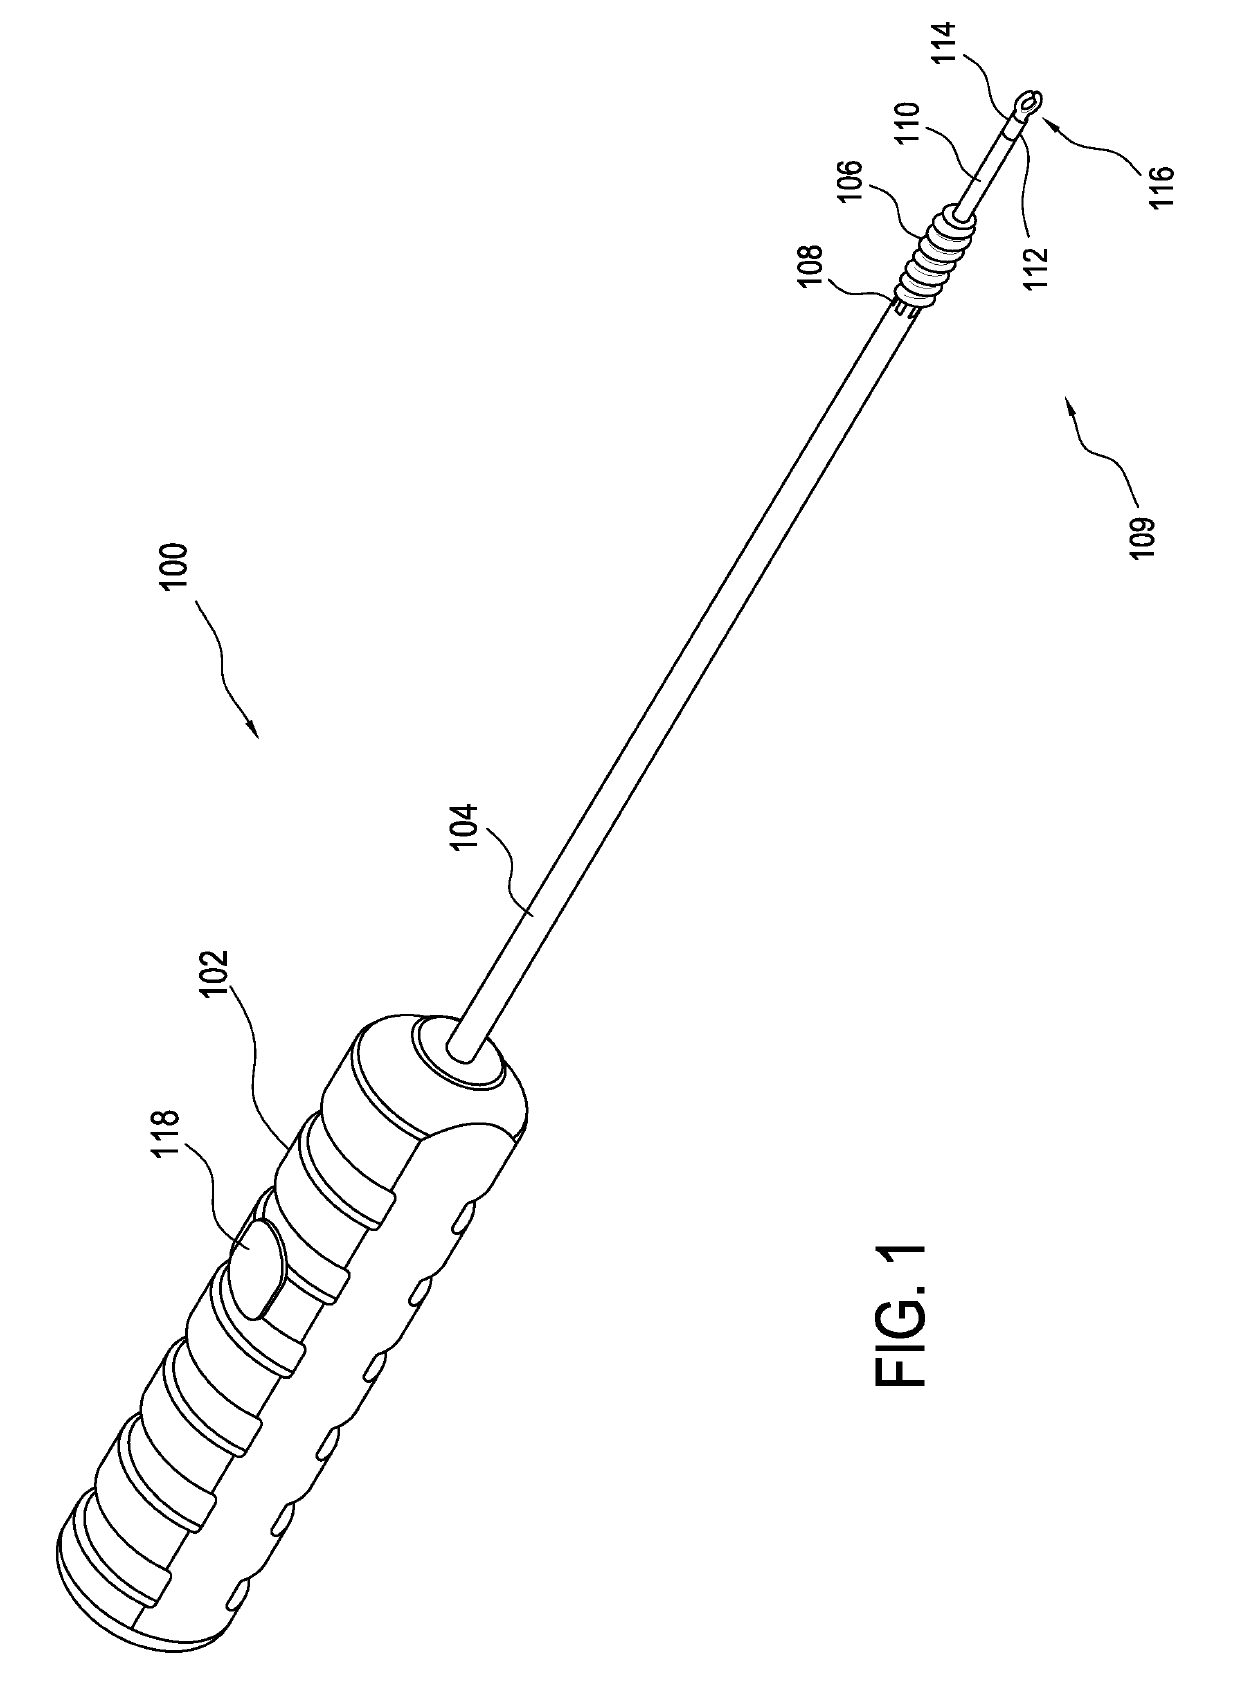 Suture tool and method of use